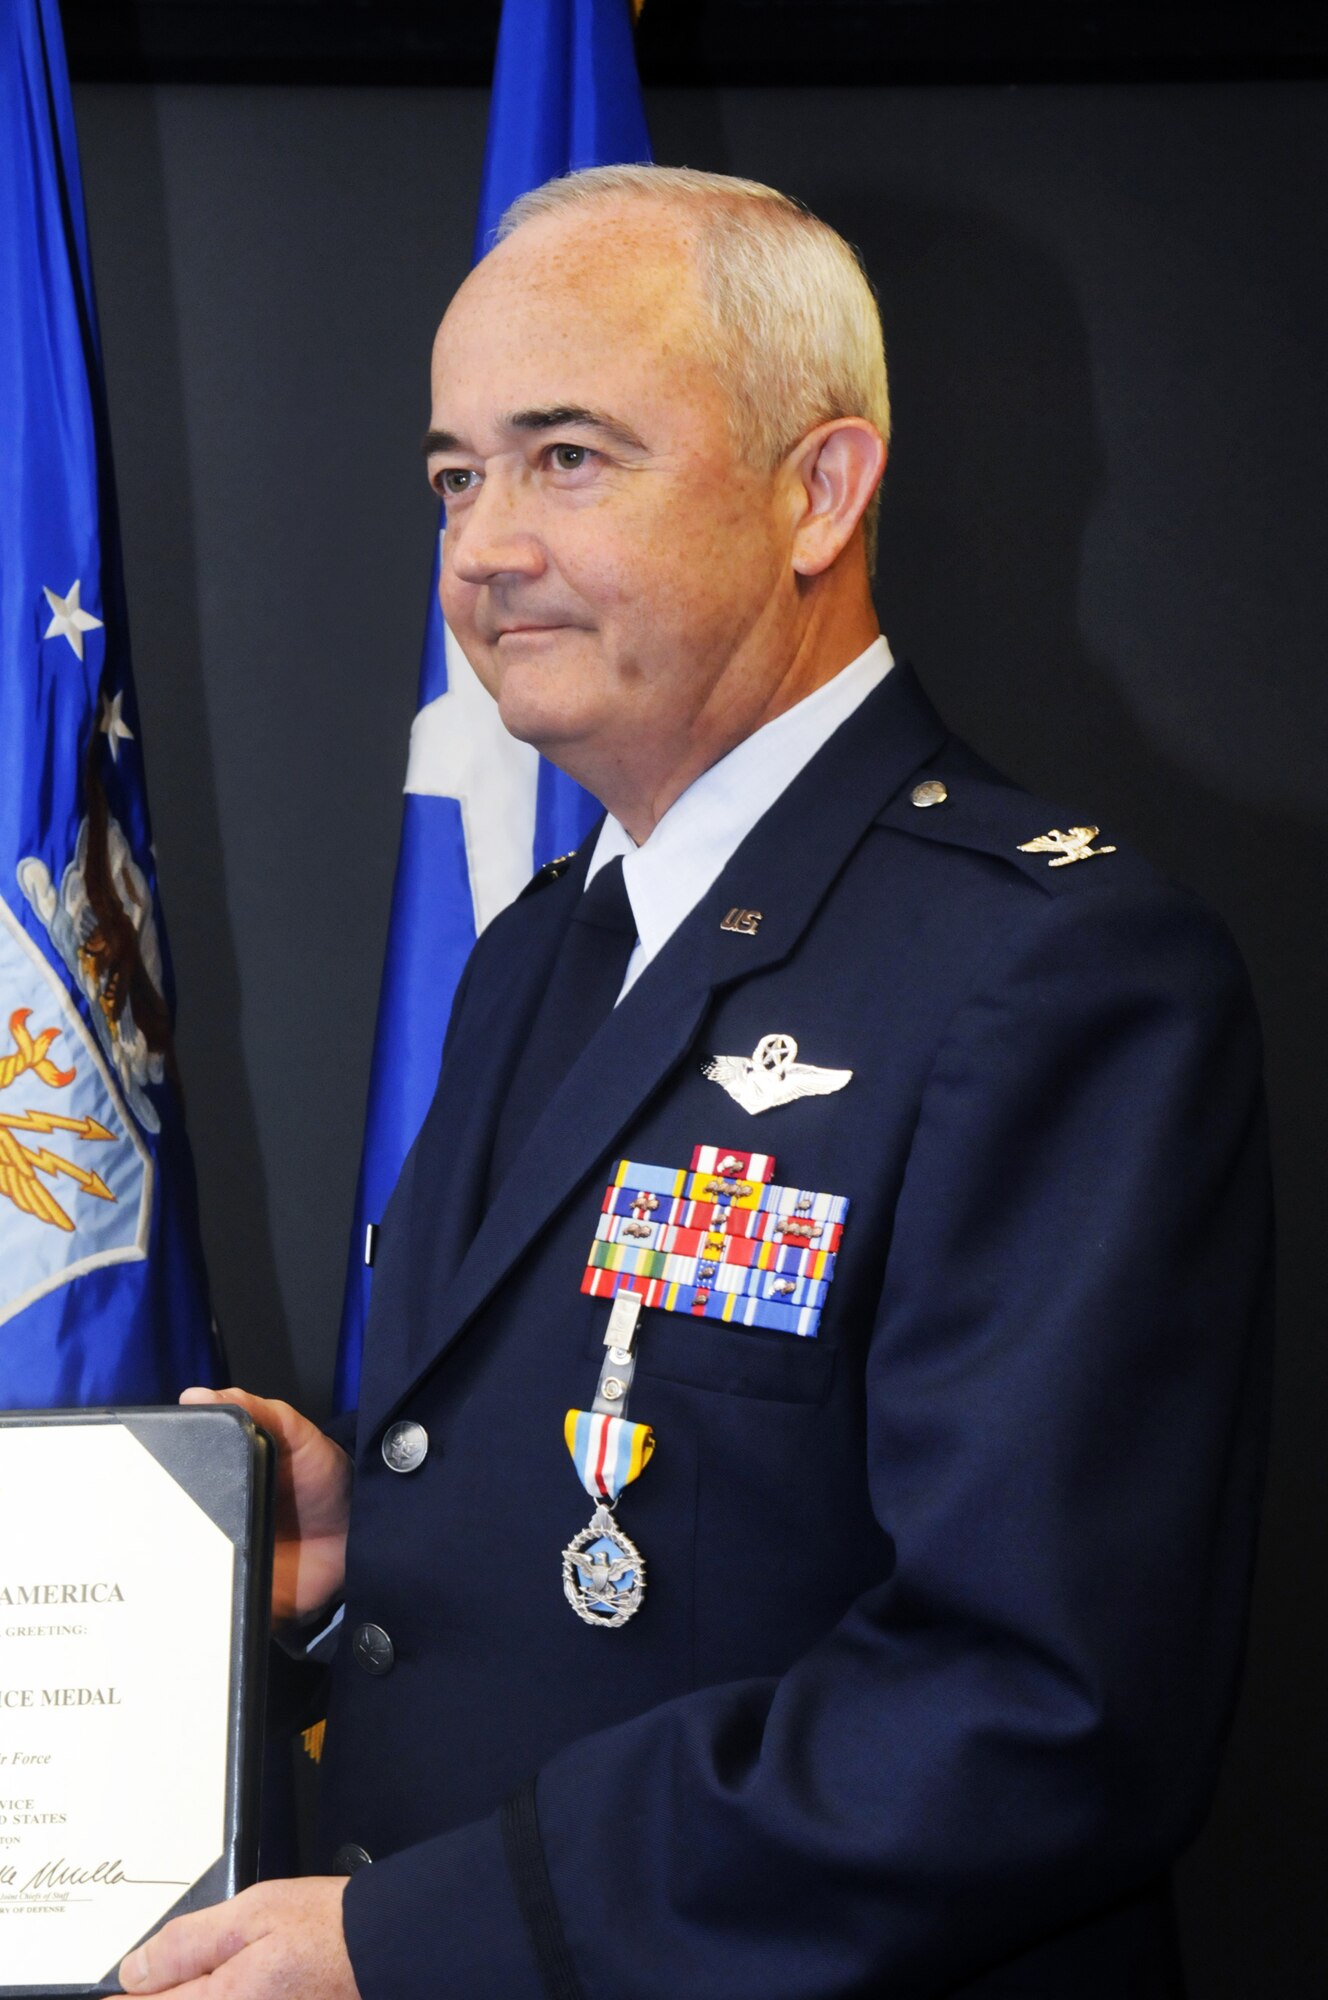 Col. John A. Cote was awarded the Defense Superior Service Medal in a presentation by Maj. Gen. Polly Peyer Sept. 29. U. S. Air Force photo by Sue Sapp